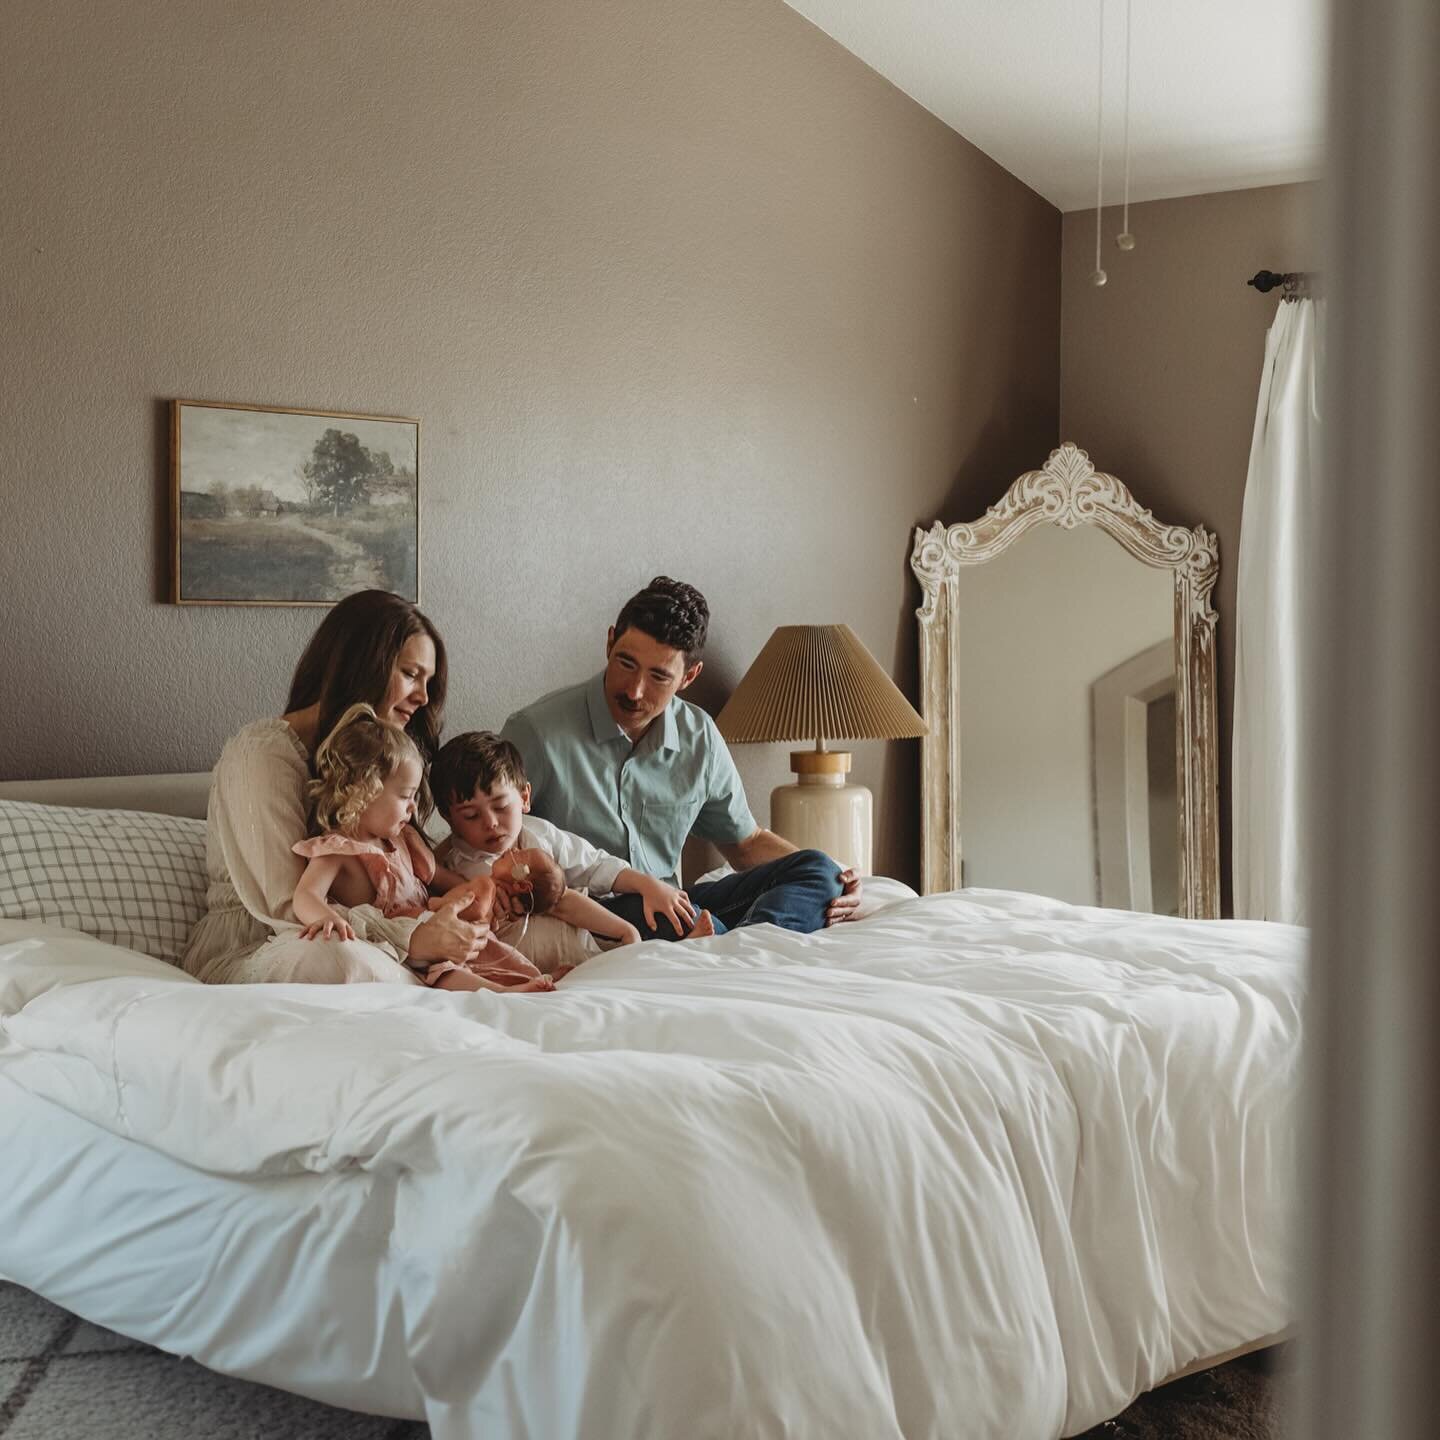 In home sessions are my favorite during Winter! I love the intimacy and coziness that they offer, no matter the weather. Kids are comfortable and familiar with their home environment which allows for extremely natural interactions. 
.
.
An in-home se